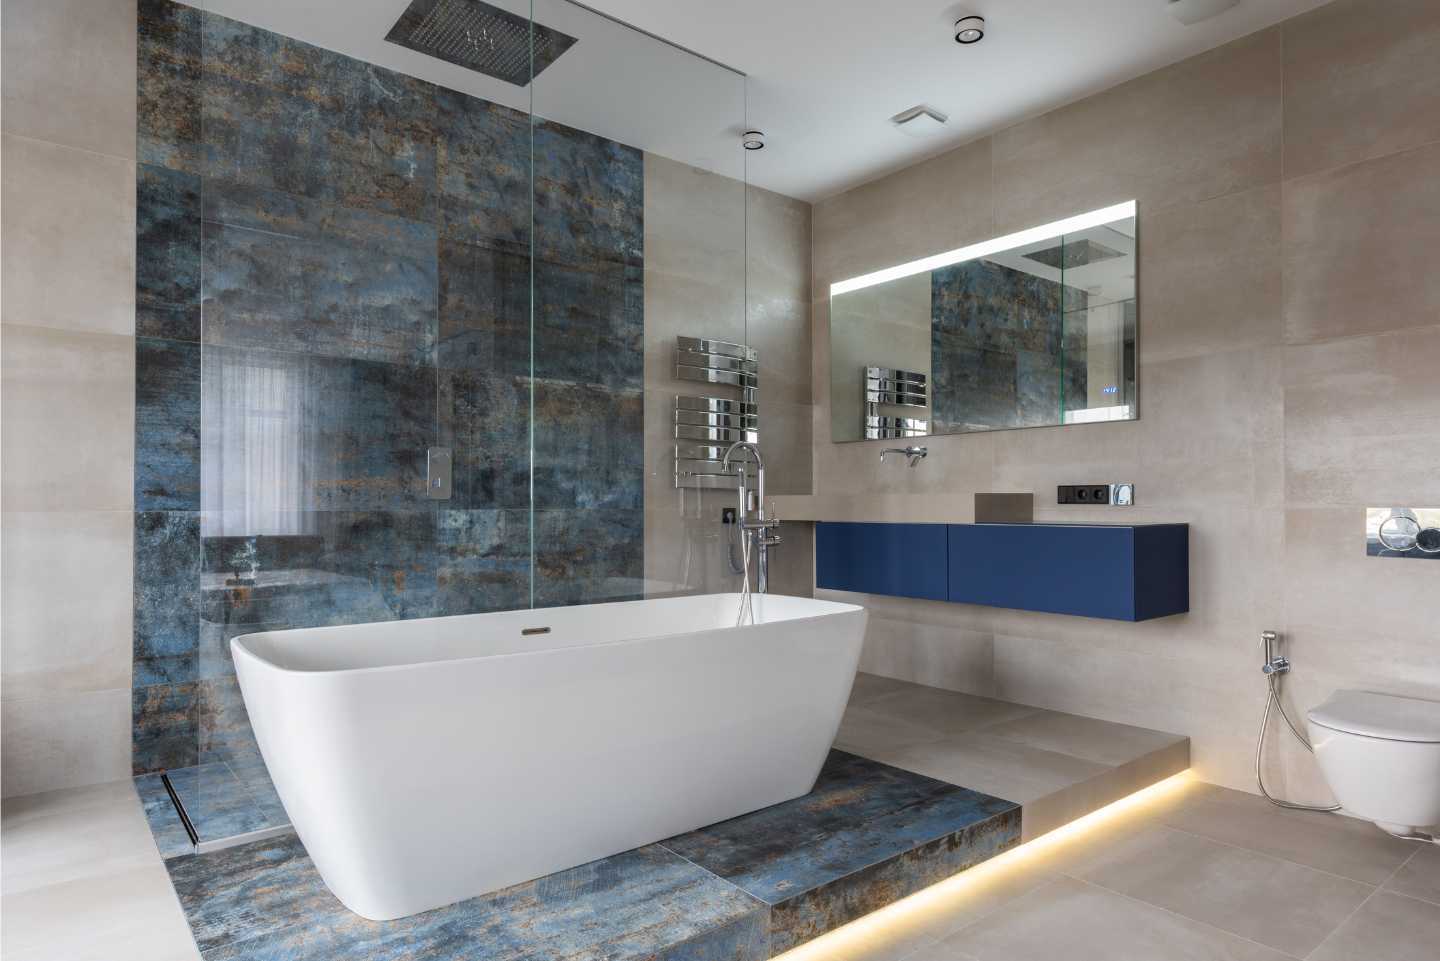 Big freestanding bathtub, walk-in shower and blue tiles in the background, also blue basins, and a large mirror above them.